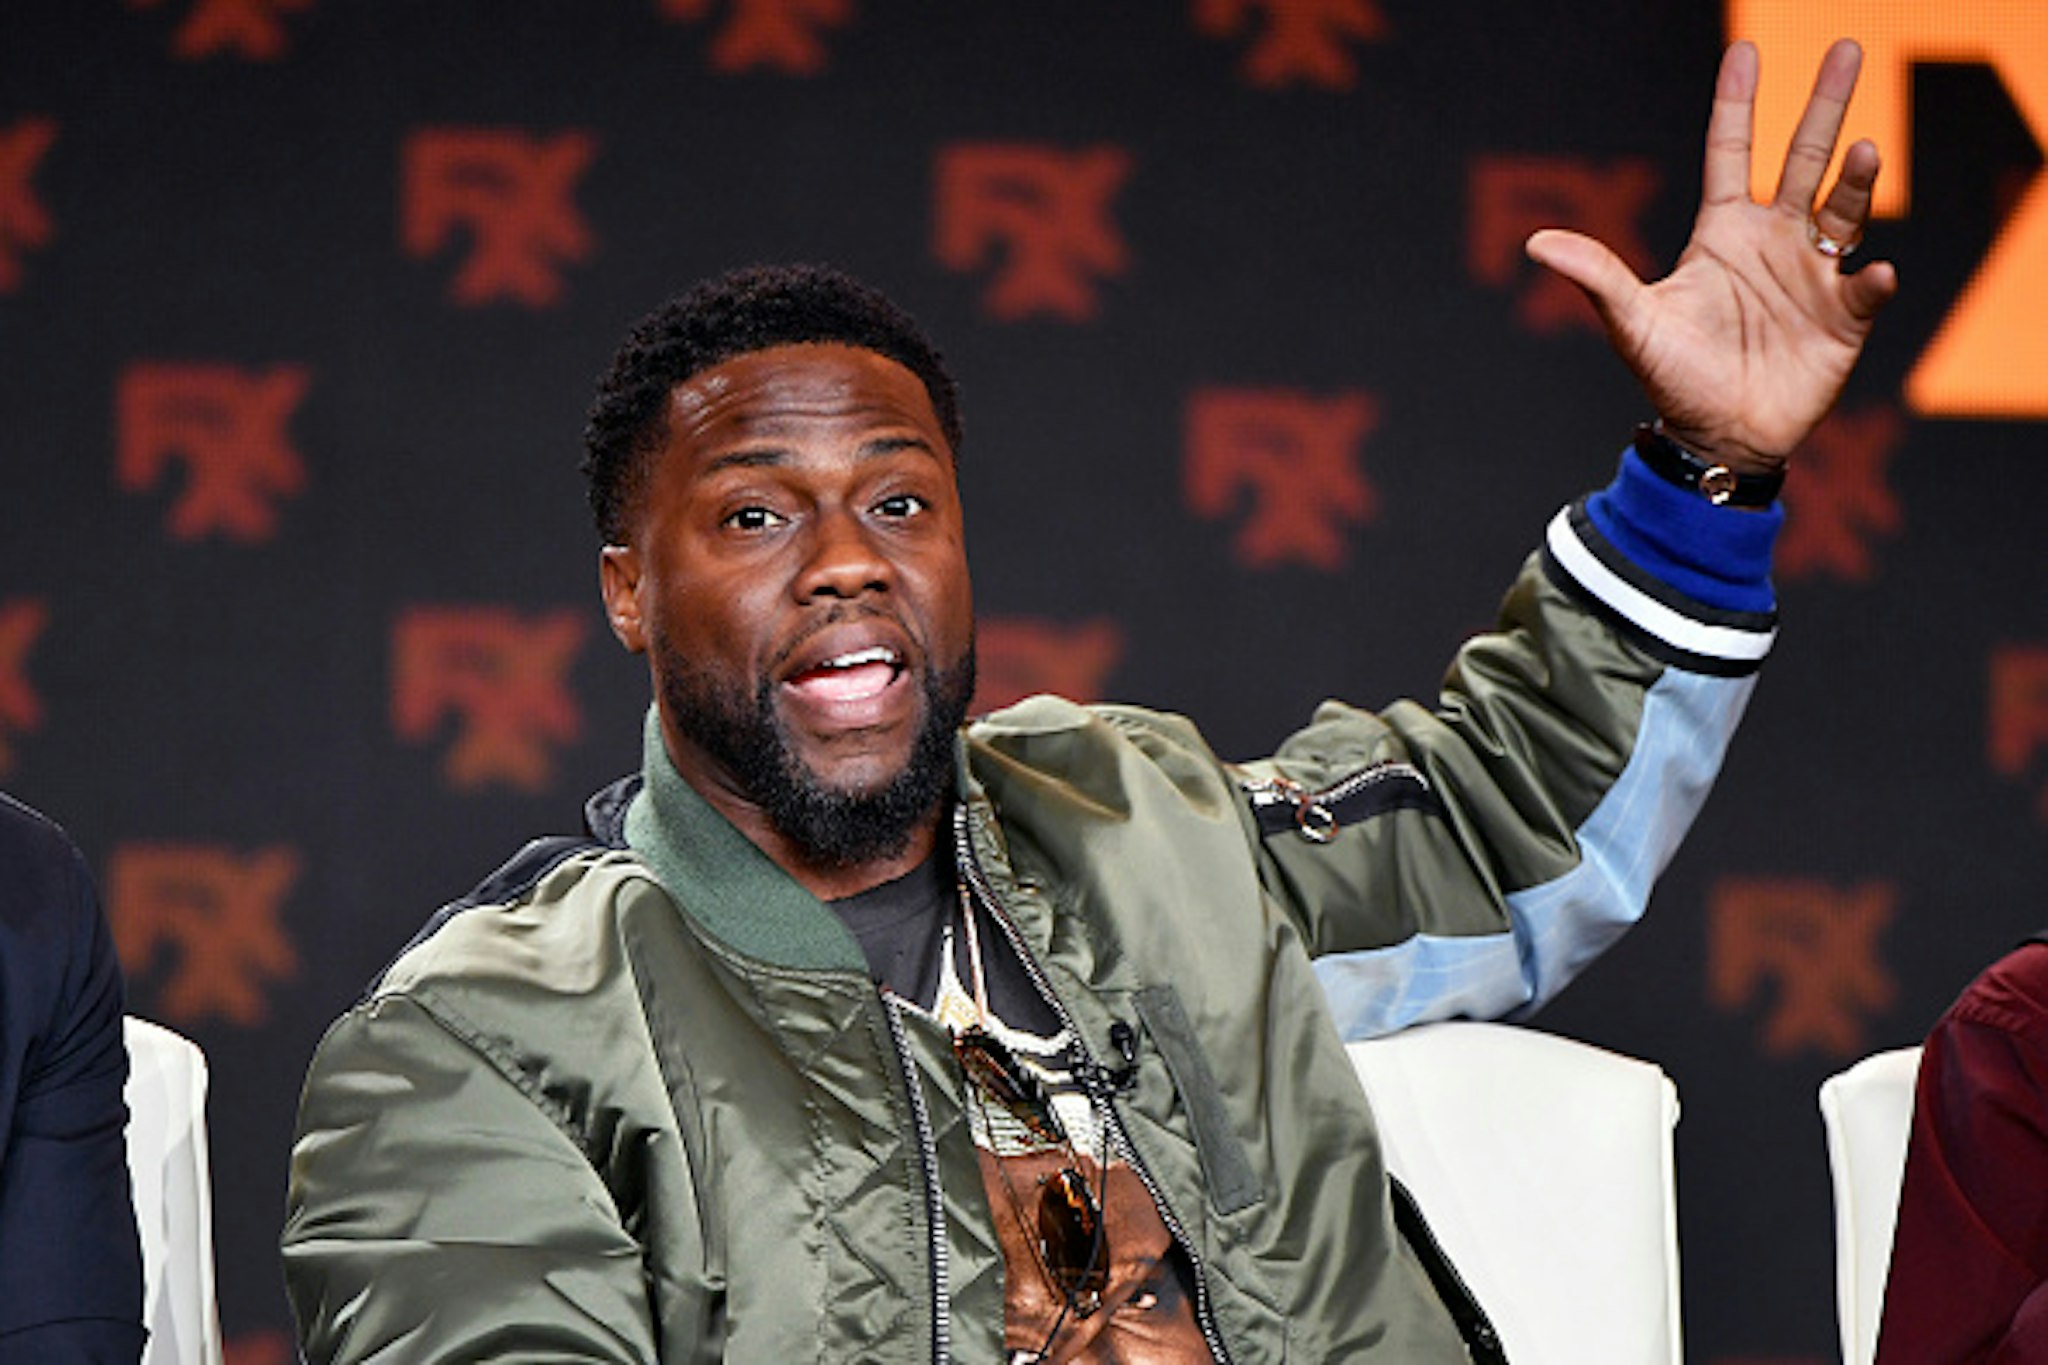 PASADENA, CALIFORNIA - JANUARY 09: Kevin Hart of 'Dave' speaks during the FX segment of the 2020 Winter TCA Tour at The Langham Huntington, Pasadena on January 09, 2020 in Pasadena, California.